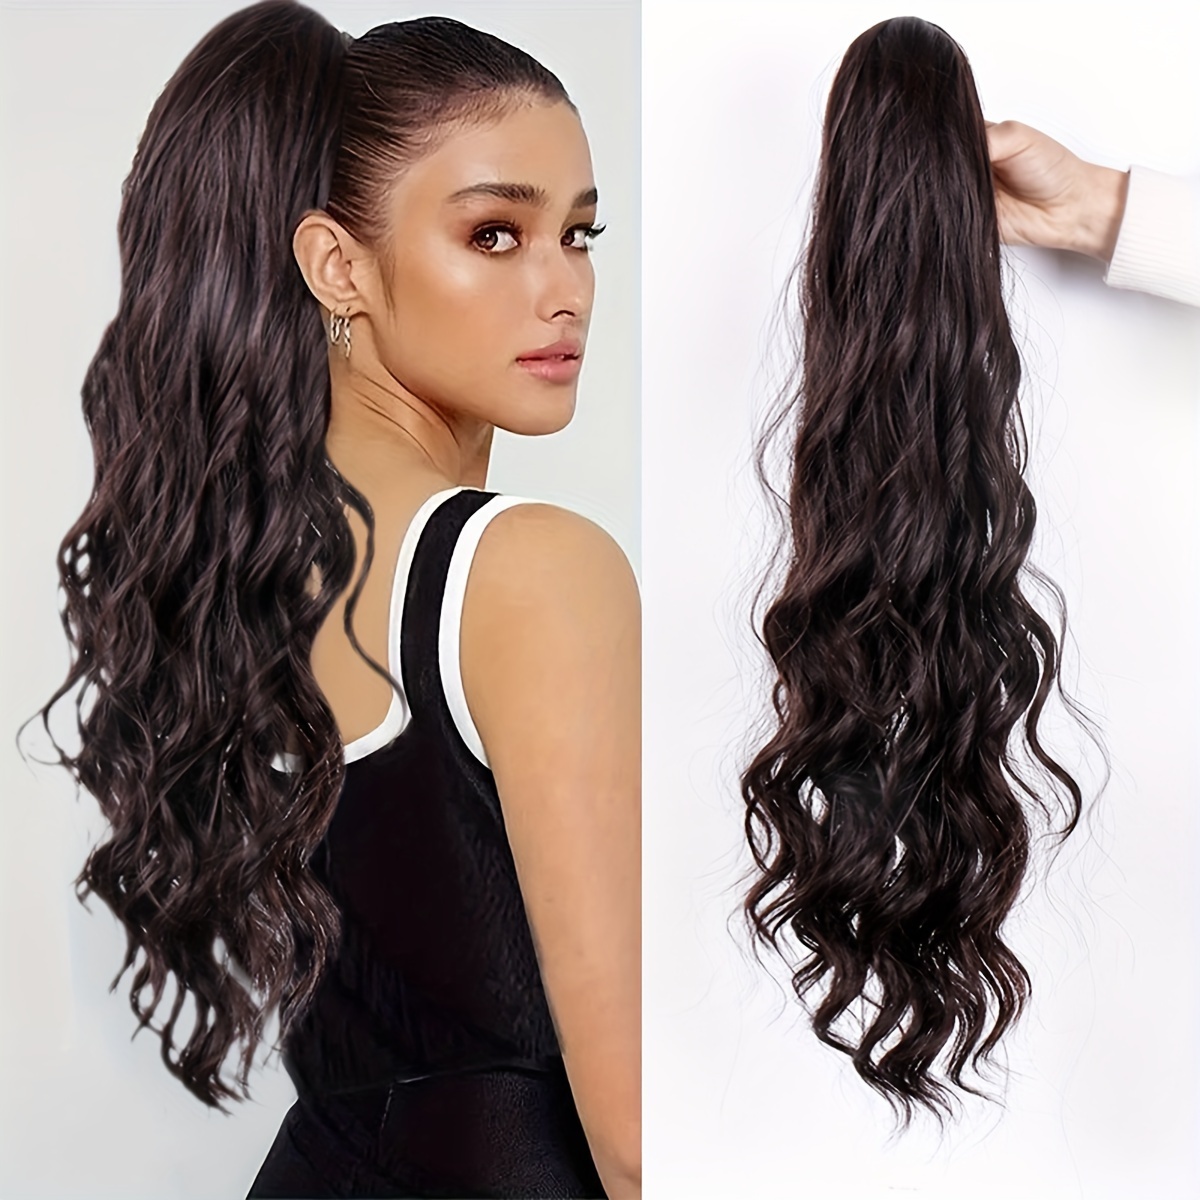 

Chic 25" Water Wave Ponytail Extension For Women - Long, Curly Synthetic Hairpiece With Drawstring Closure, Perfect For Daily Wear & Parties